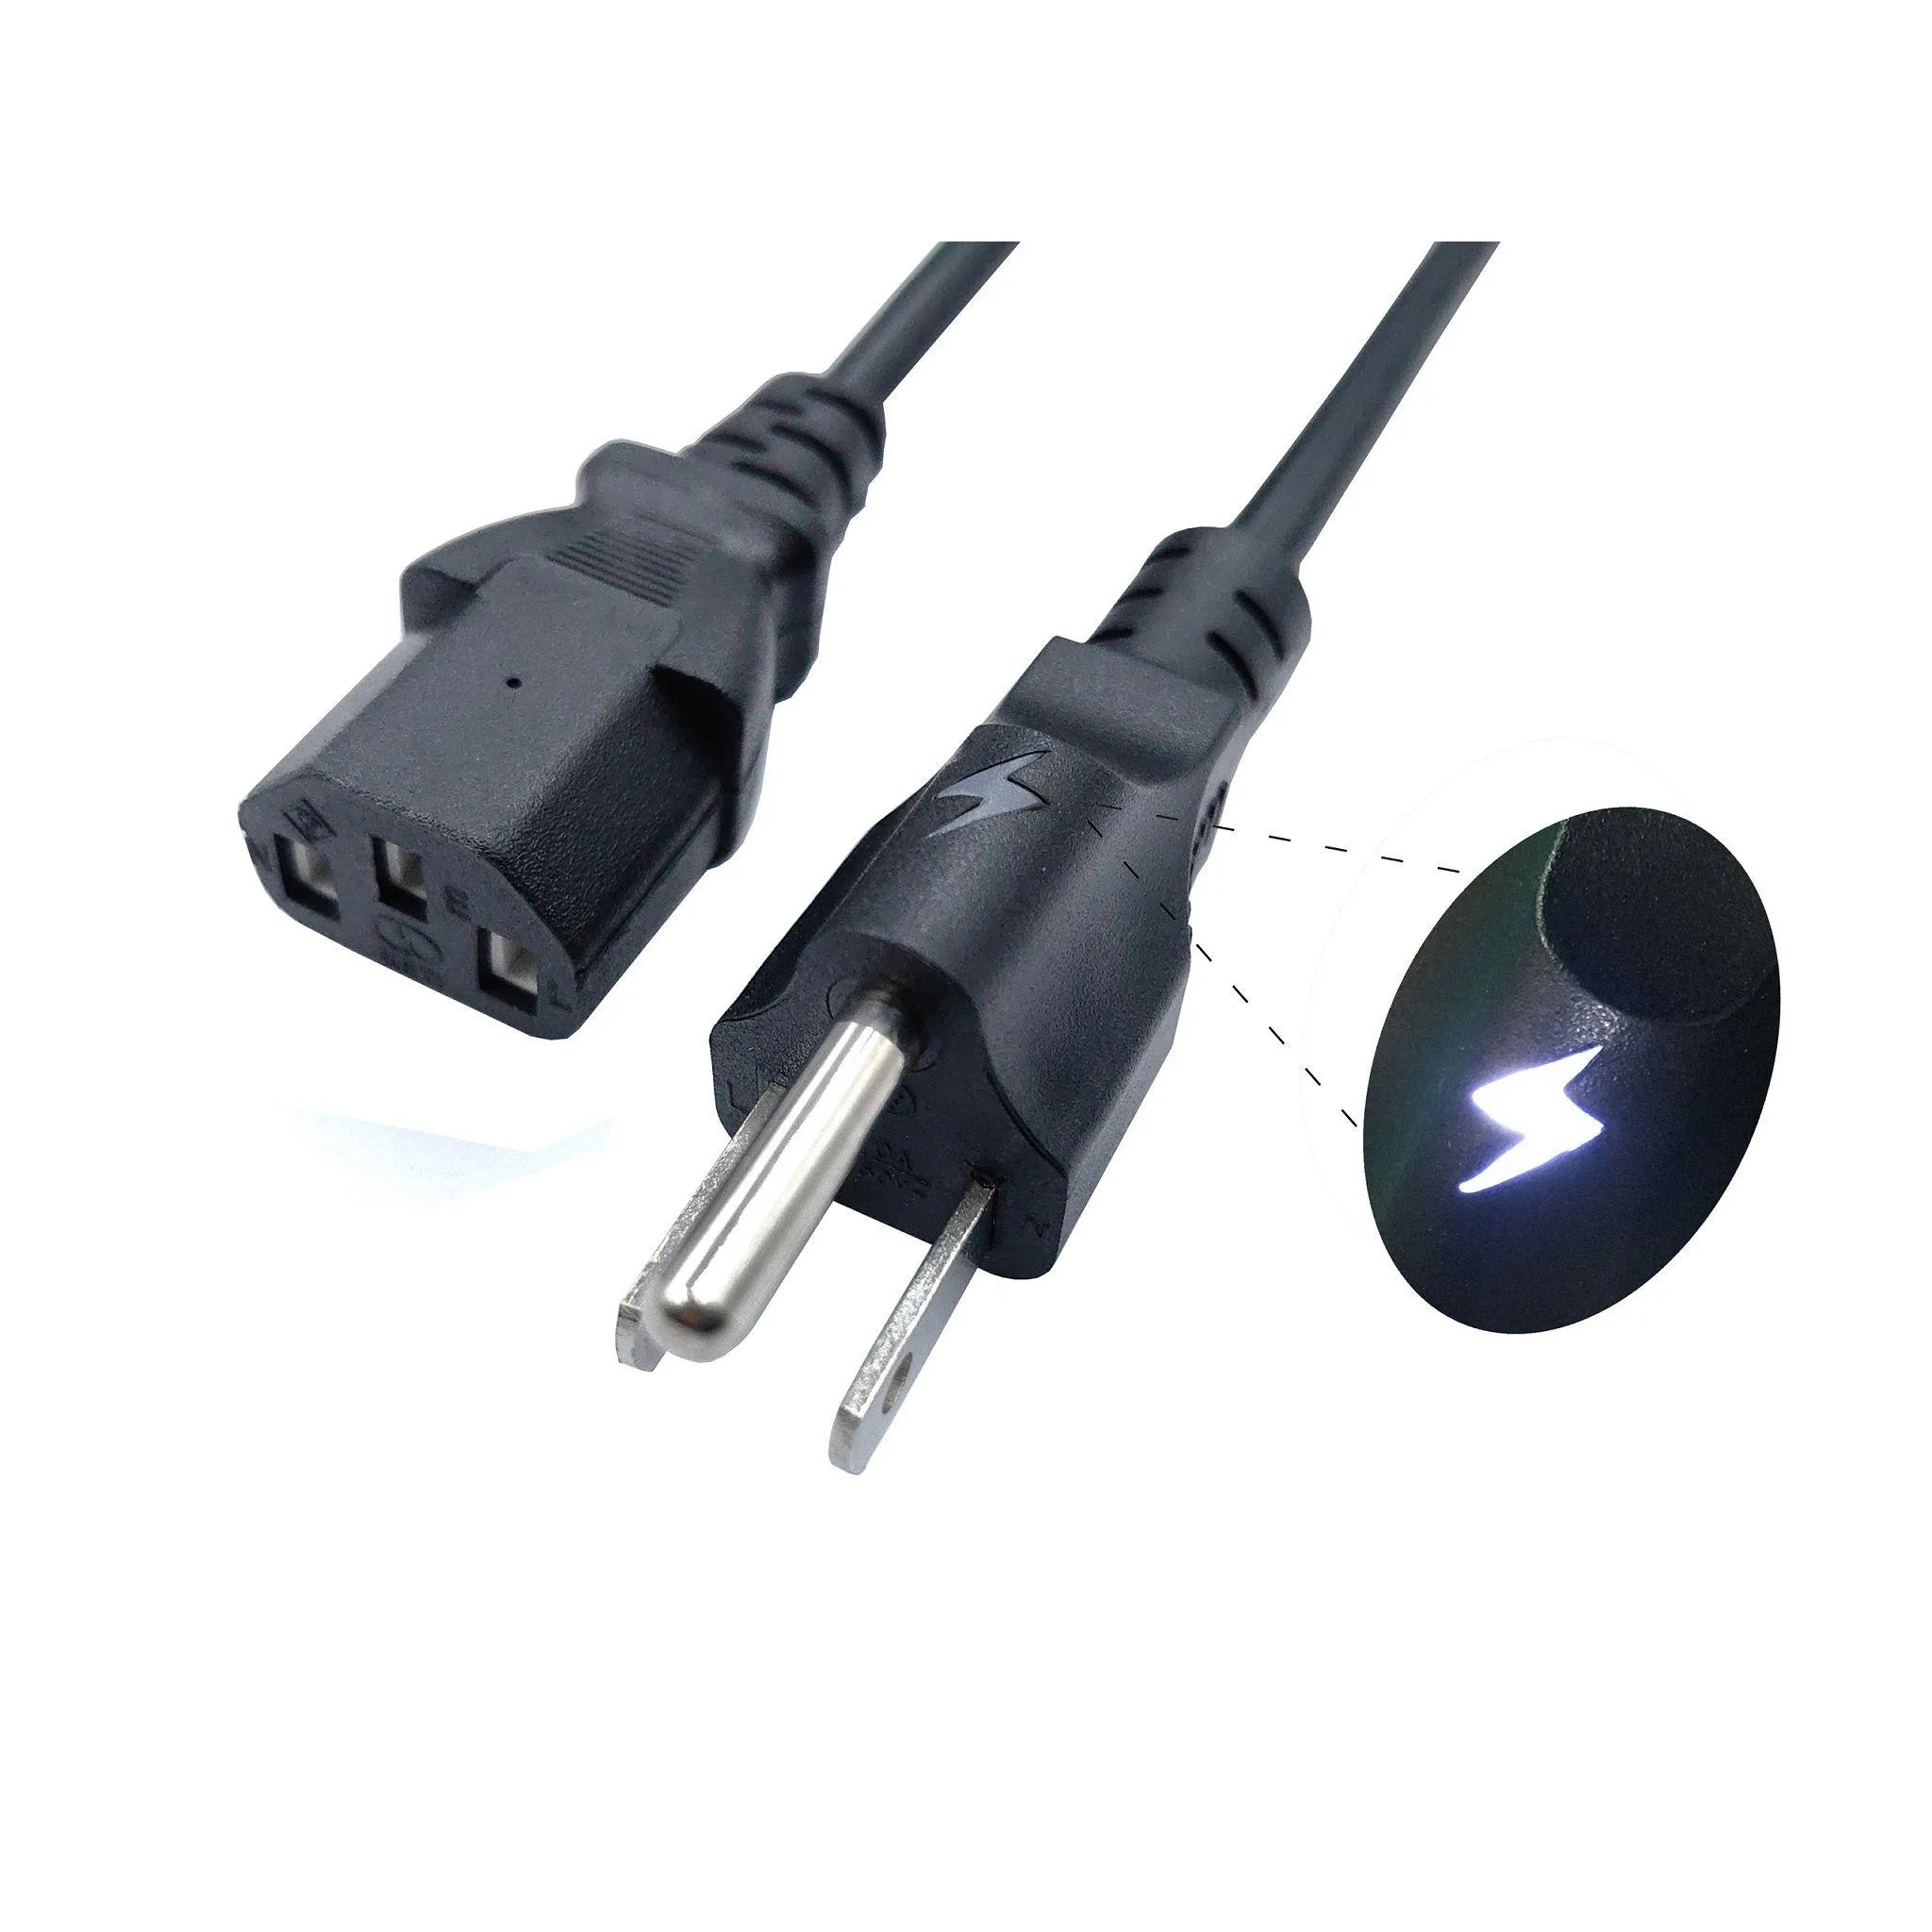 Computer Cables Connectors 5Ft 1.5M Breathing Light Indication Us Power Cord 10A 125V 18Awg Black Replacement C13 3 Prong Ac For Elect Dh9Uy